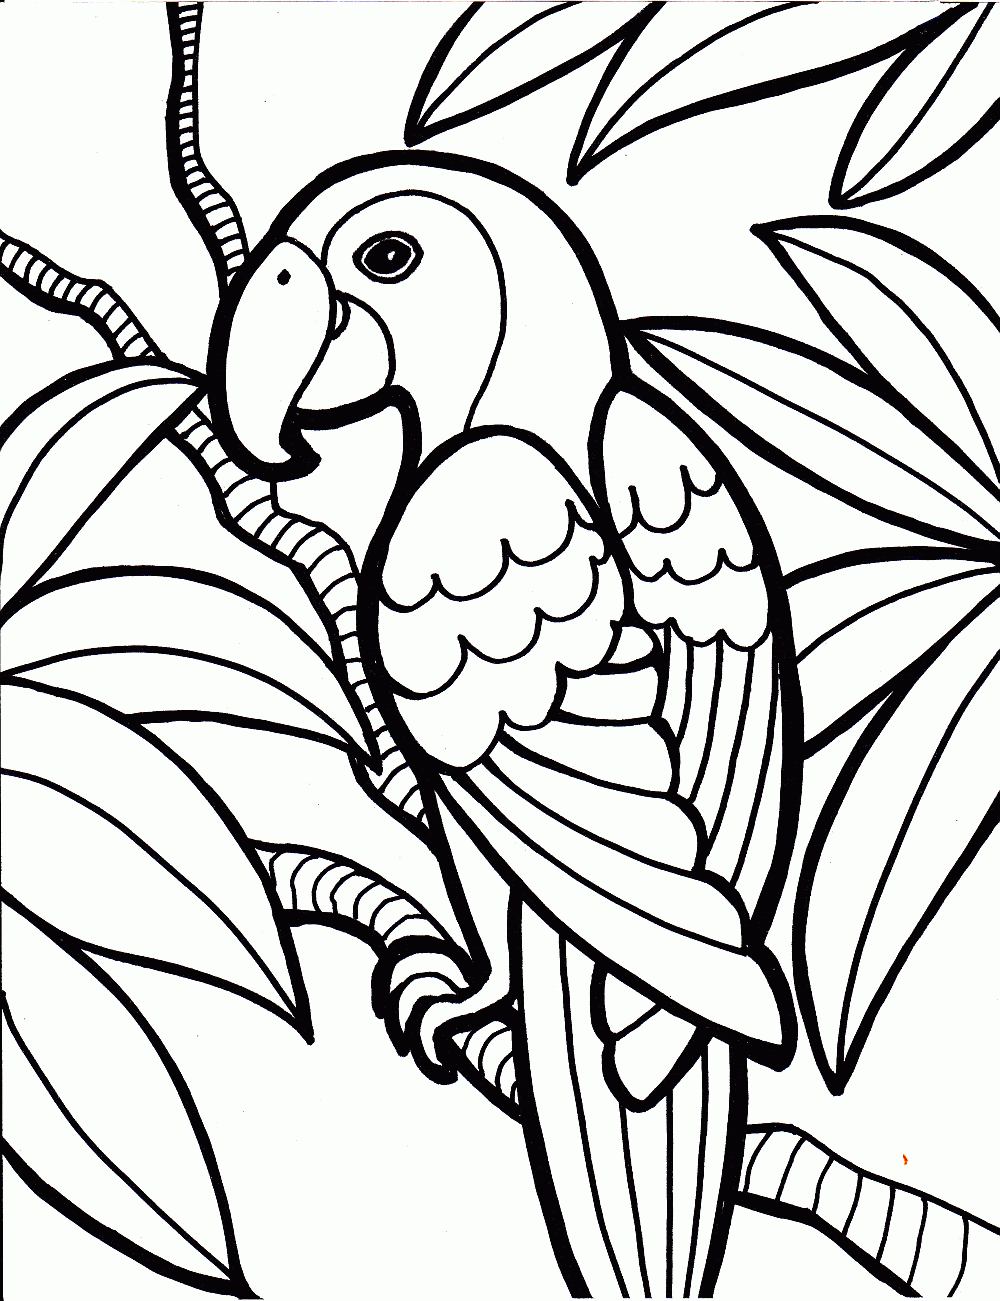 Boys Coloring Pages Free Printable Coloring Sheets For Kids ...